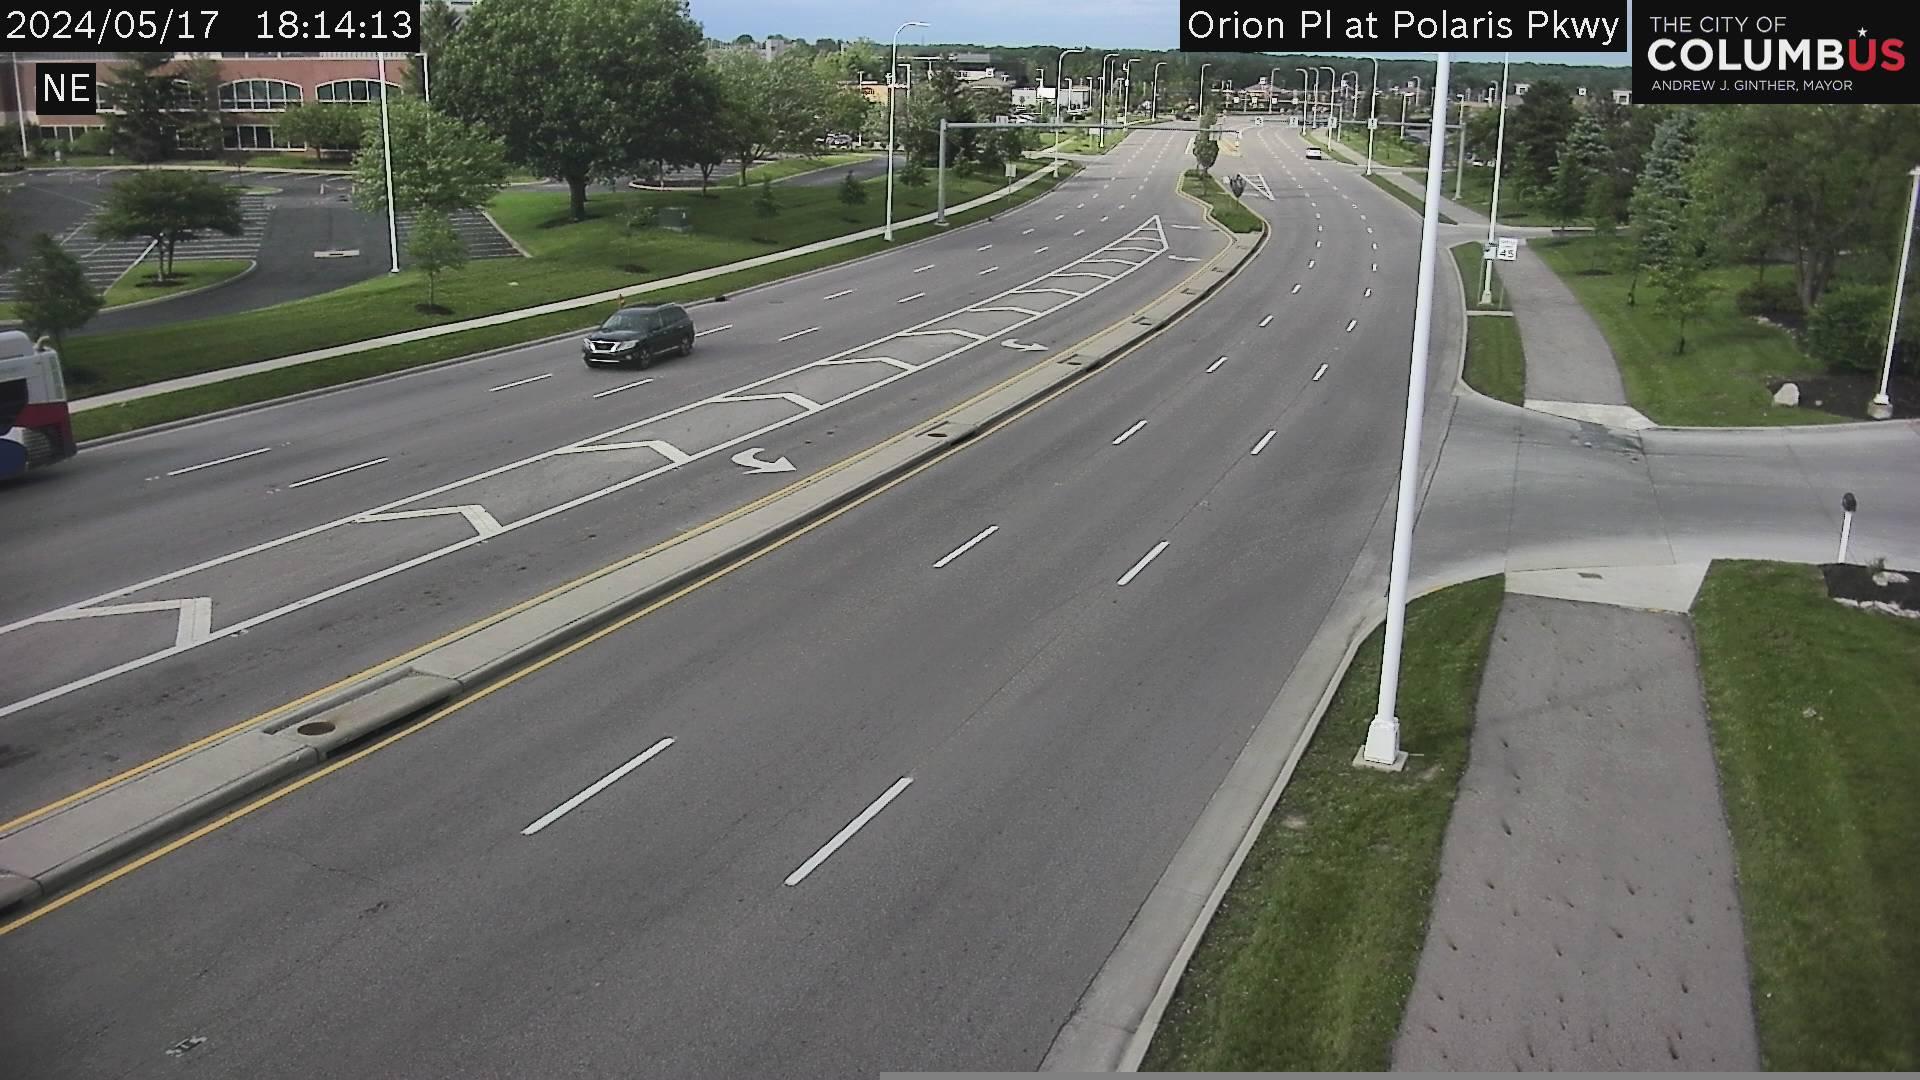 Westerville: City of Columbus) Polaris Pkwy at Orion Pl Traffic Camera